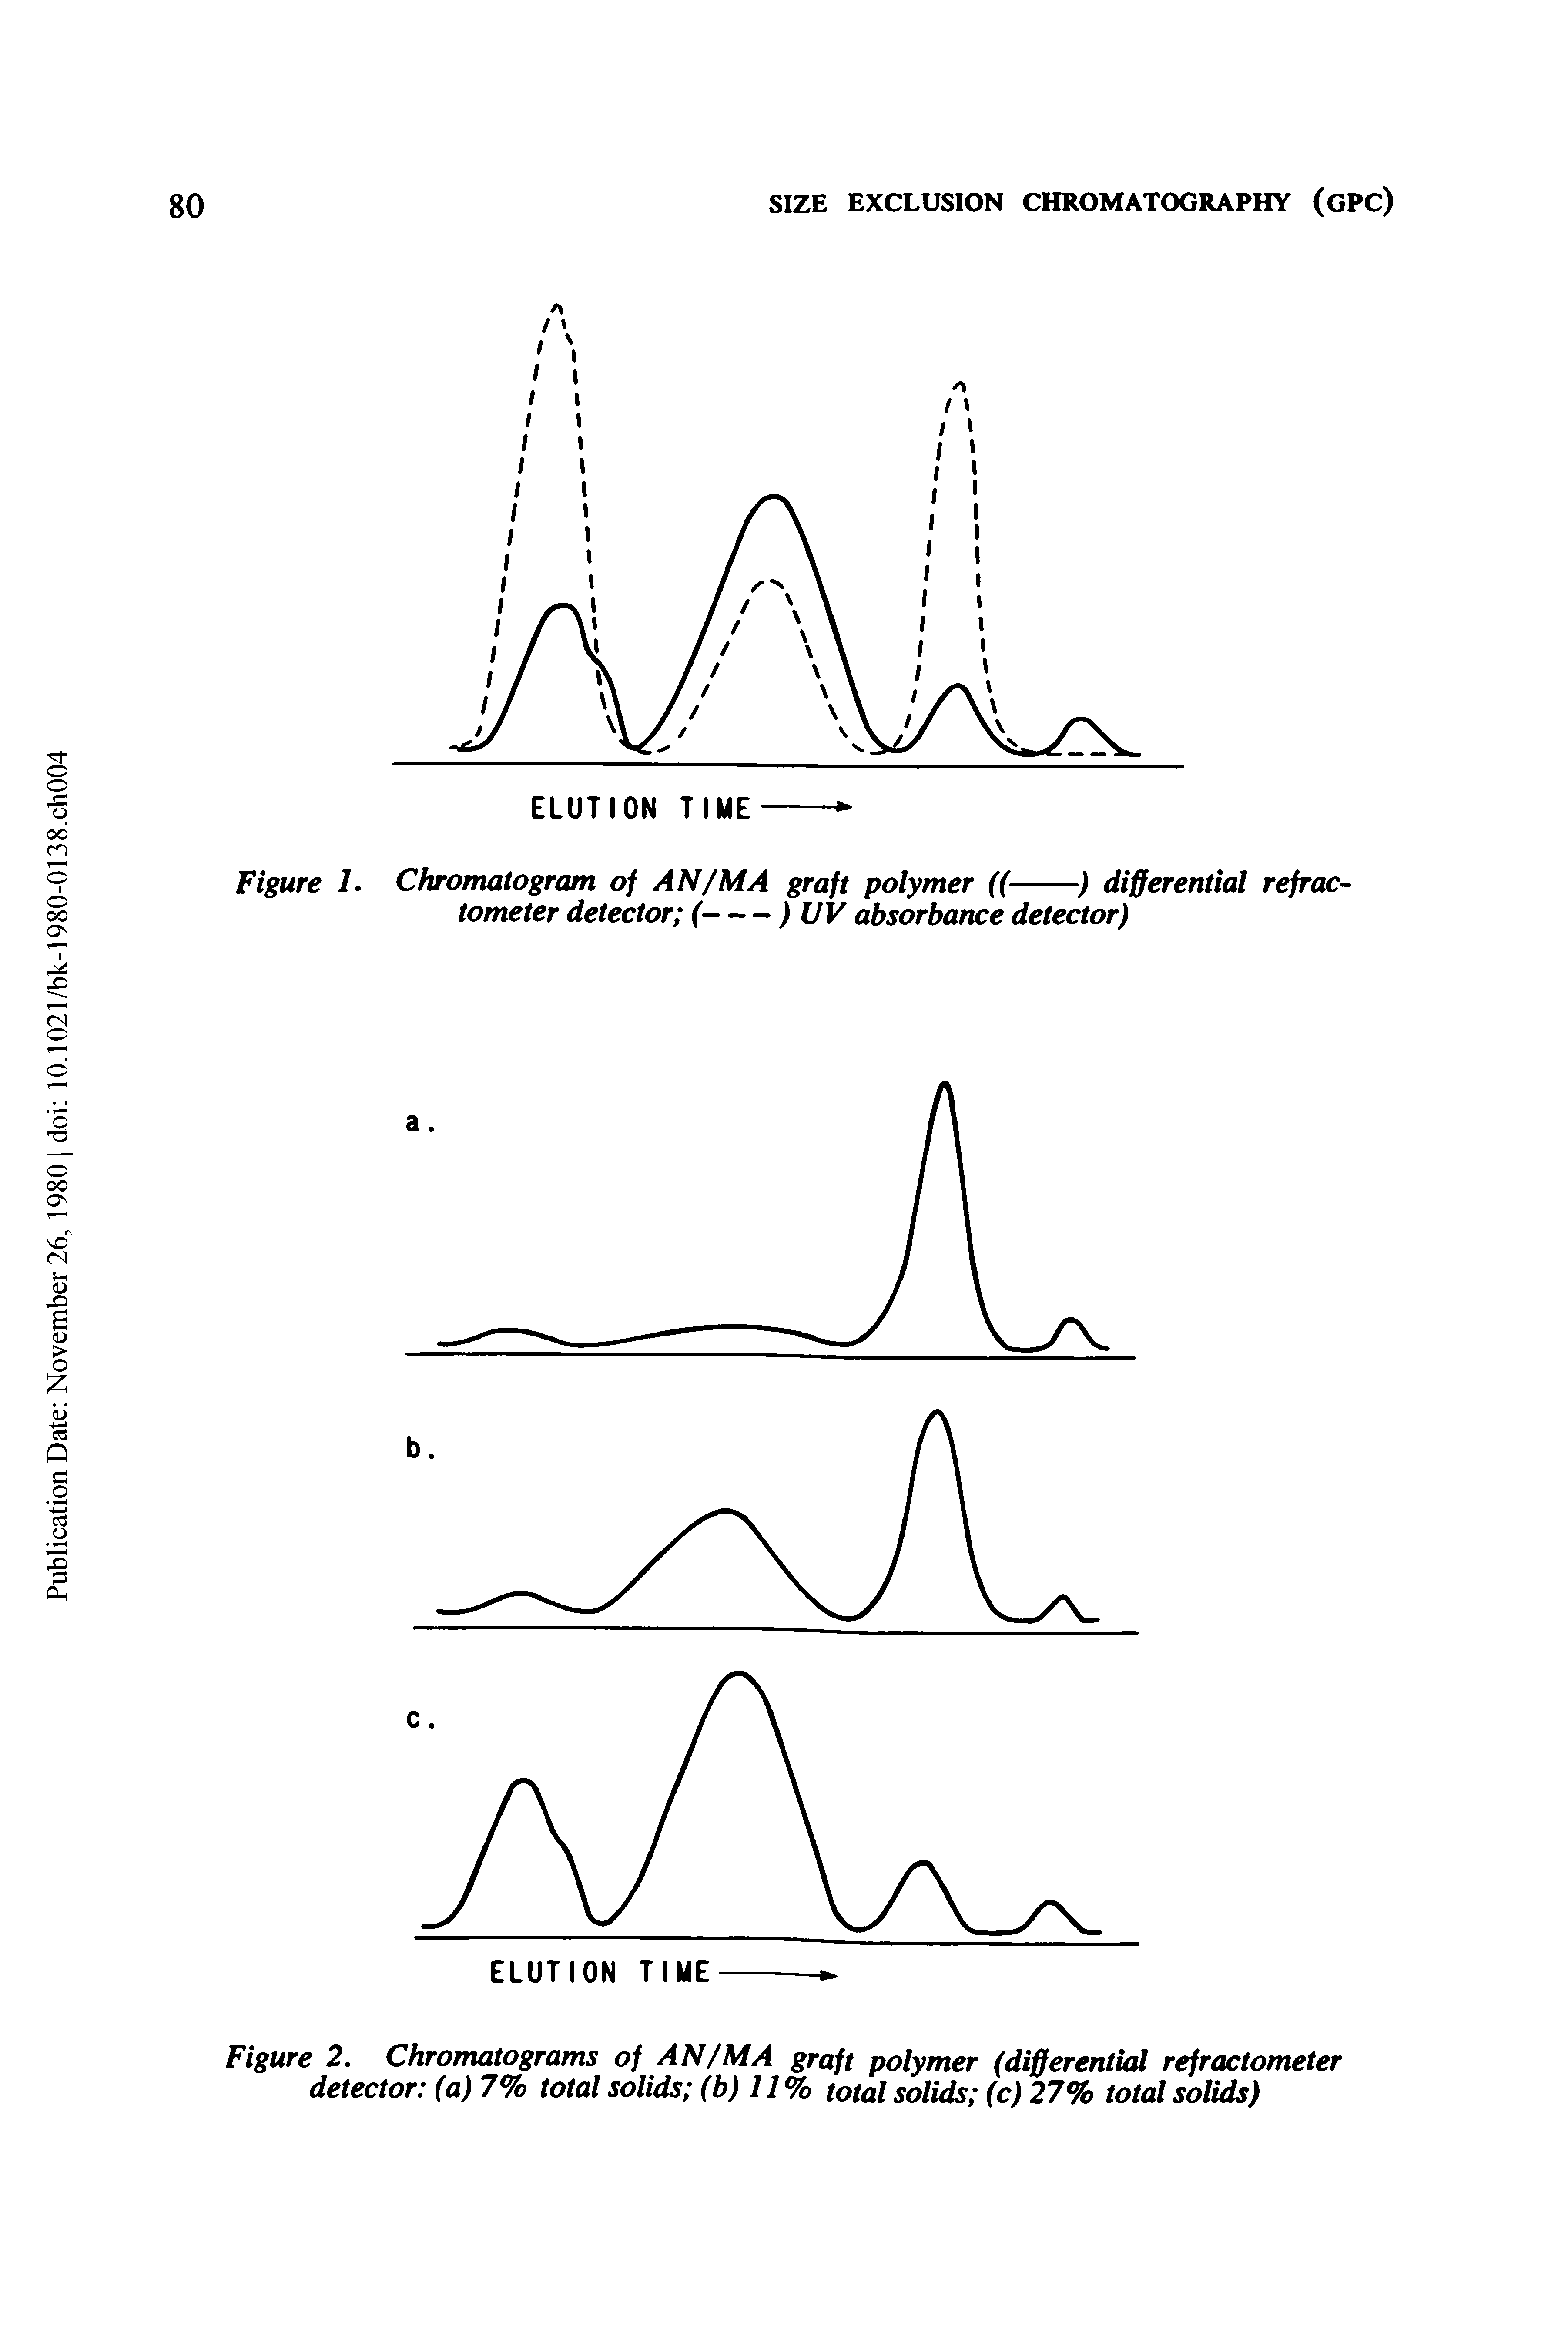 Figure 2. Chromatograms of AN/MA graft polymer (differential refractometer detector (a) 7% total solids (b) 11% total solids (c) 27% total solids)...